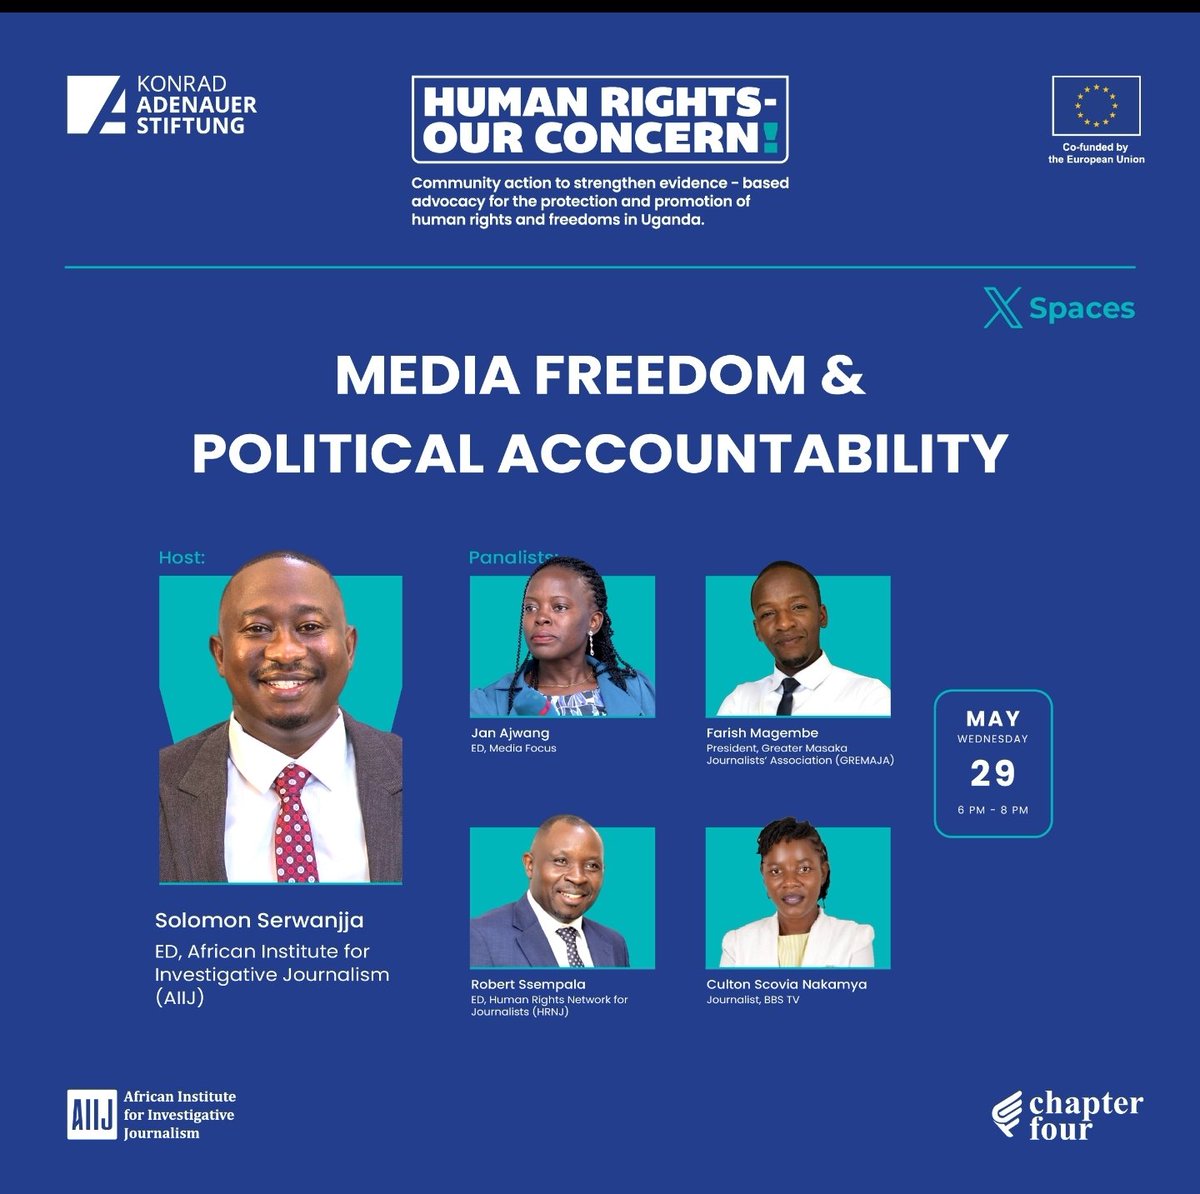 Tonight, our president joins a panel hosted by @AfricanIIJ to discuss #MediaFreedom and Political Accountability. The focus will be on strengthening advocacy for journalists protecting the truth, and promoting human rights and freedoms in Uganda.
@HRNJUganda @CPJAfrica